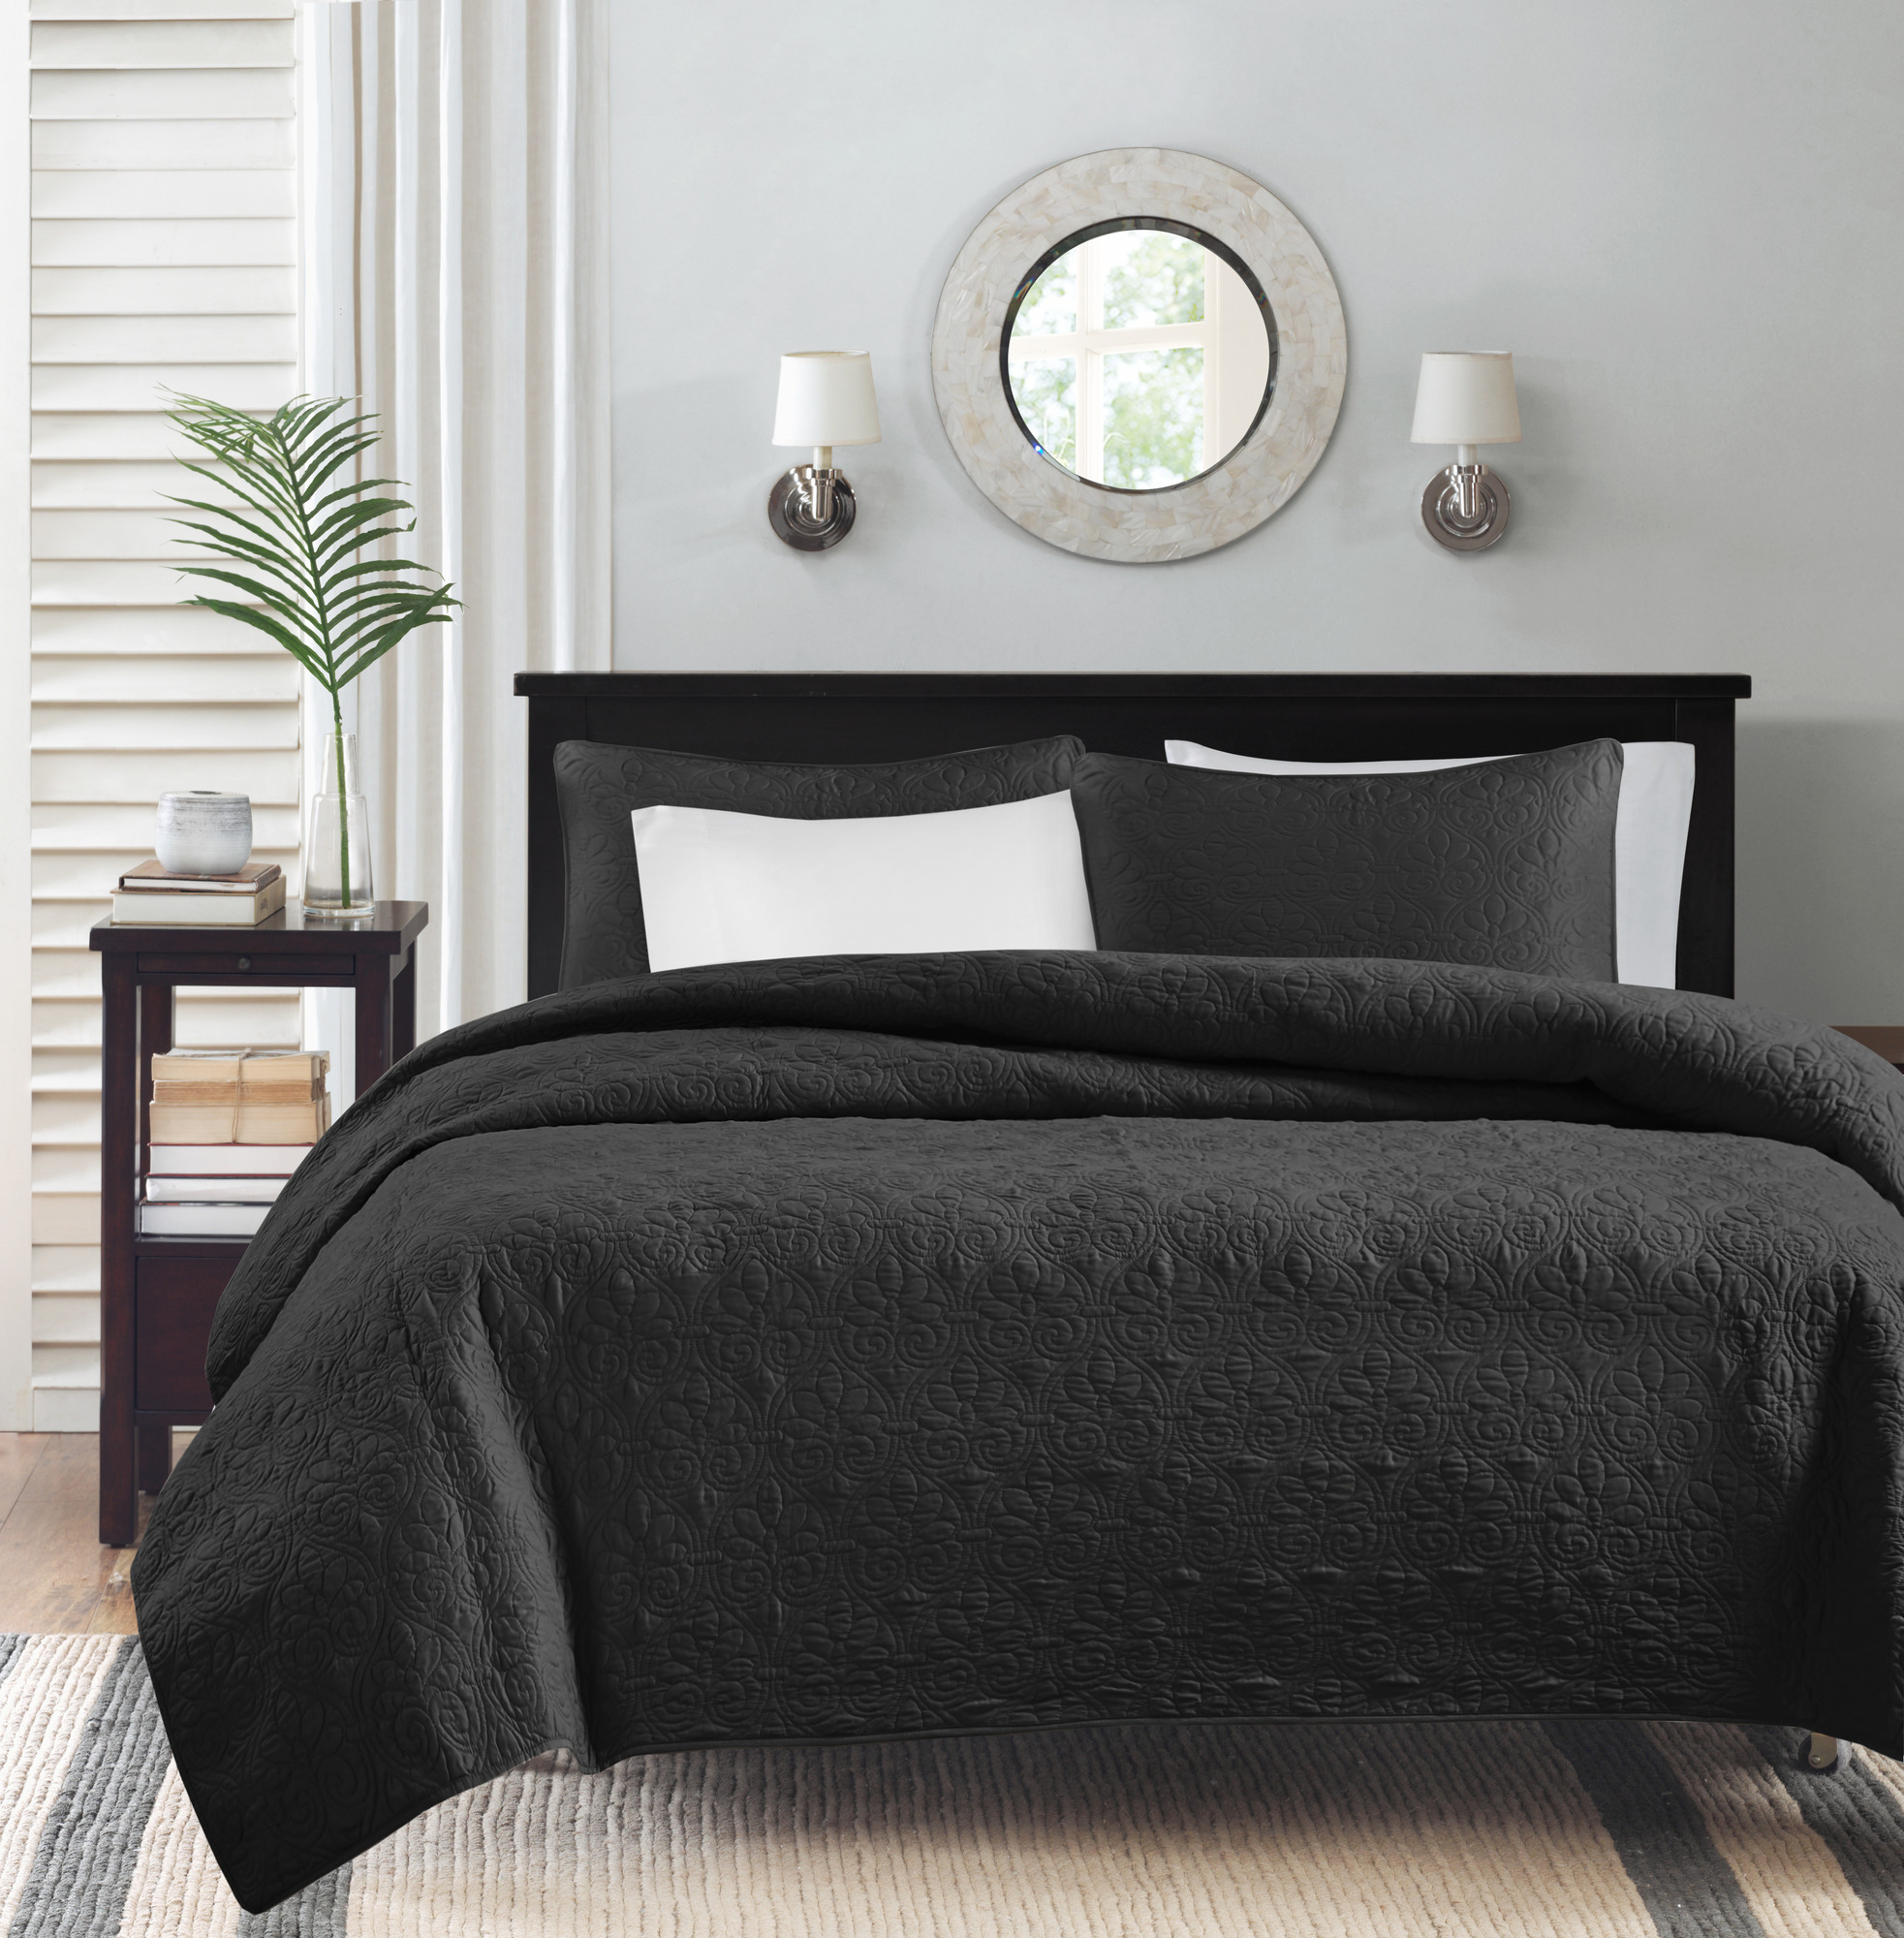 Home Essence Vancouver Super Soft Reversible Coverlet Set, Black, Full/Queen - image 3 of 10